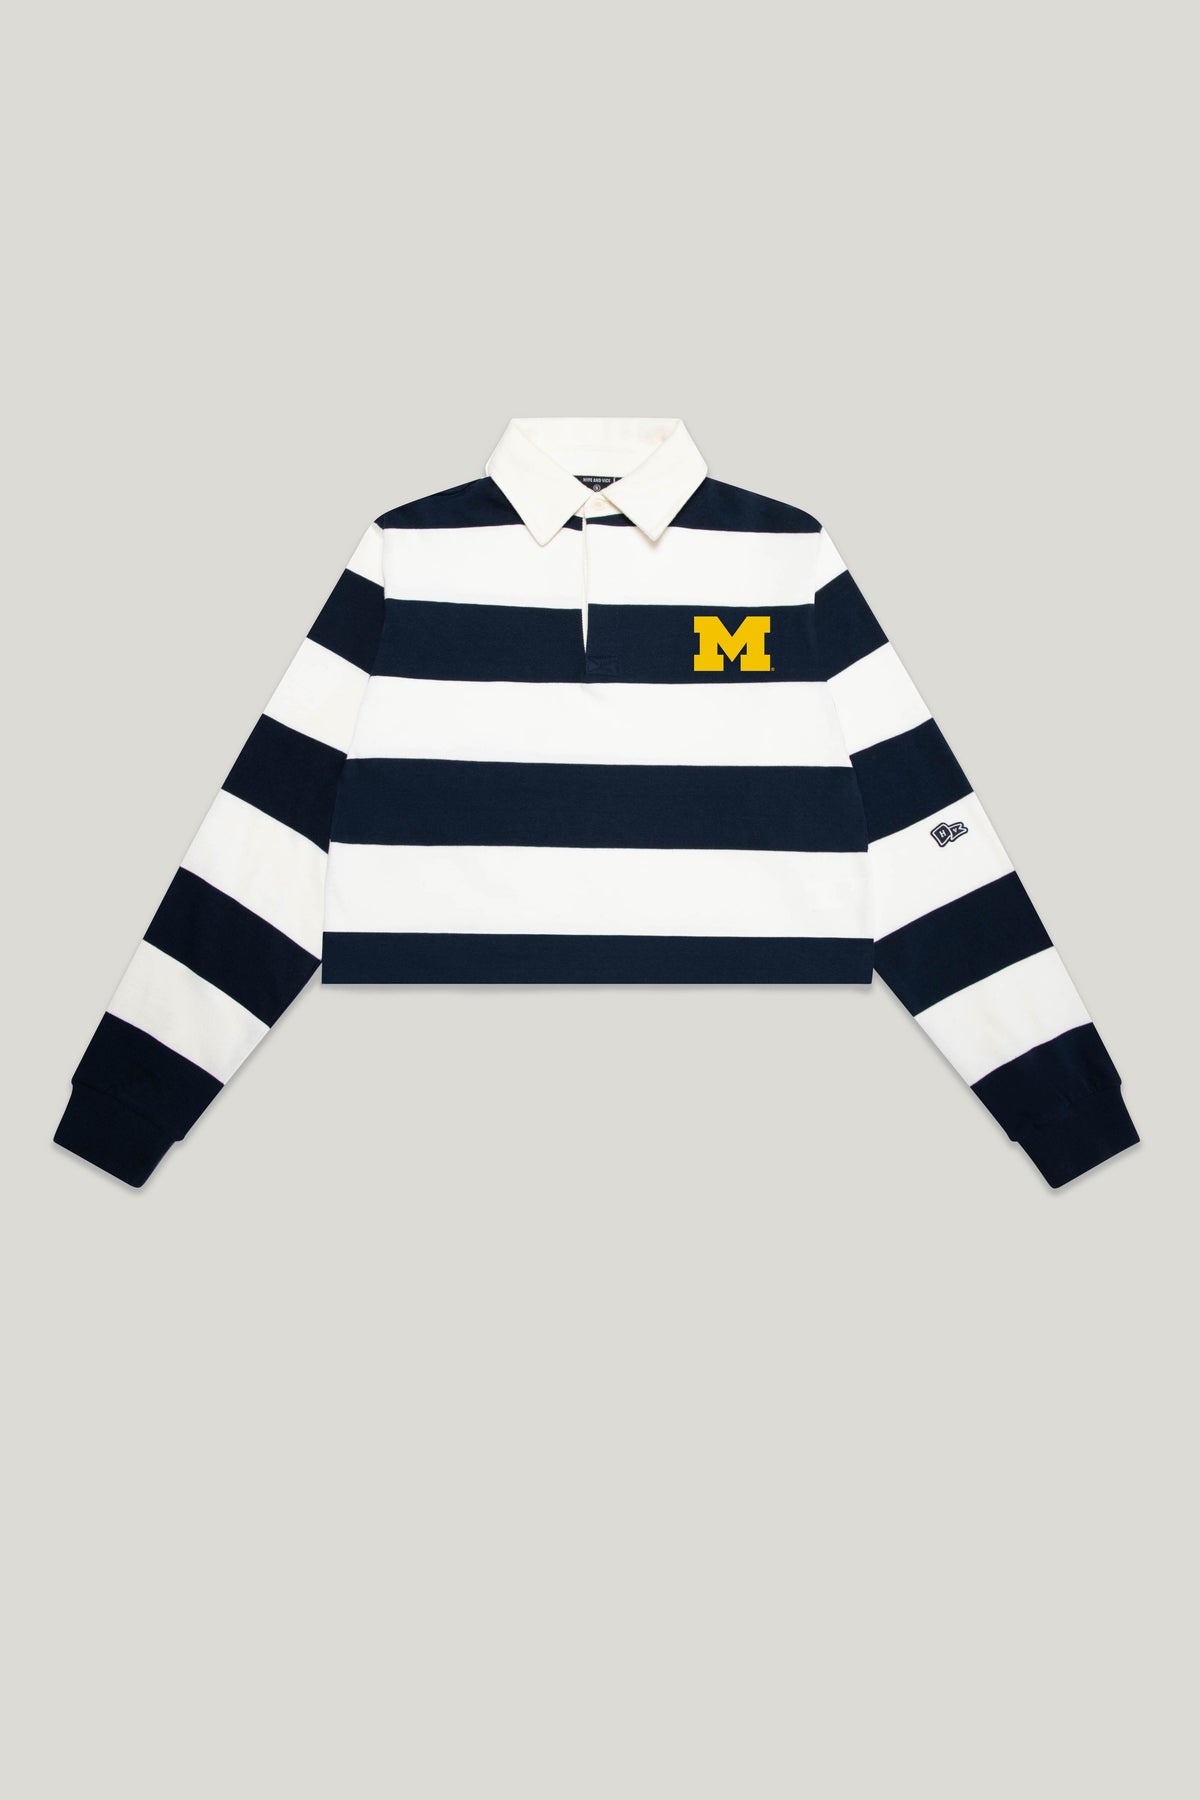 University of Michigan Rugby Top